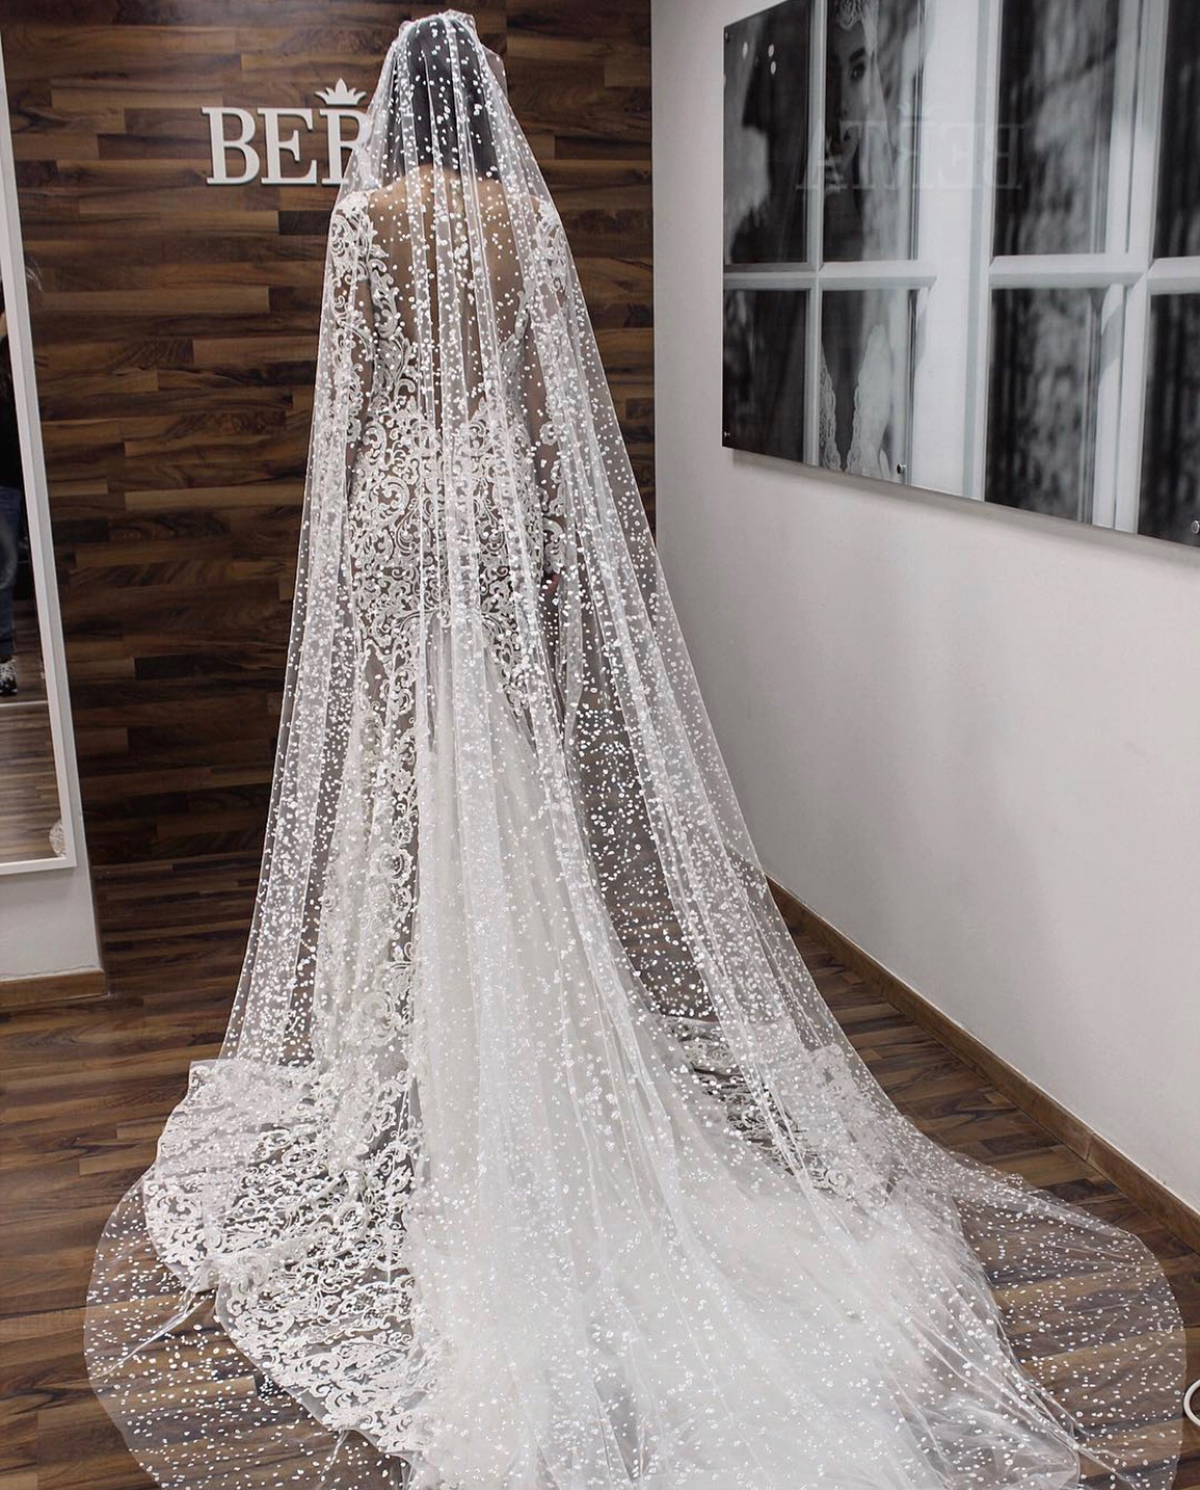 16 Wedding Veils To Buy Now To Accessorise A Bridal Outfit